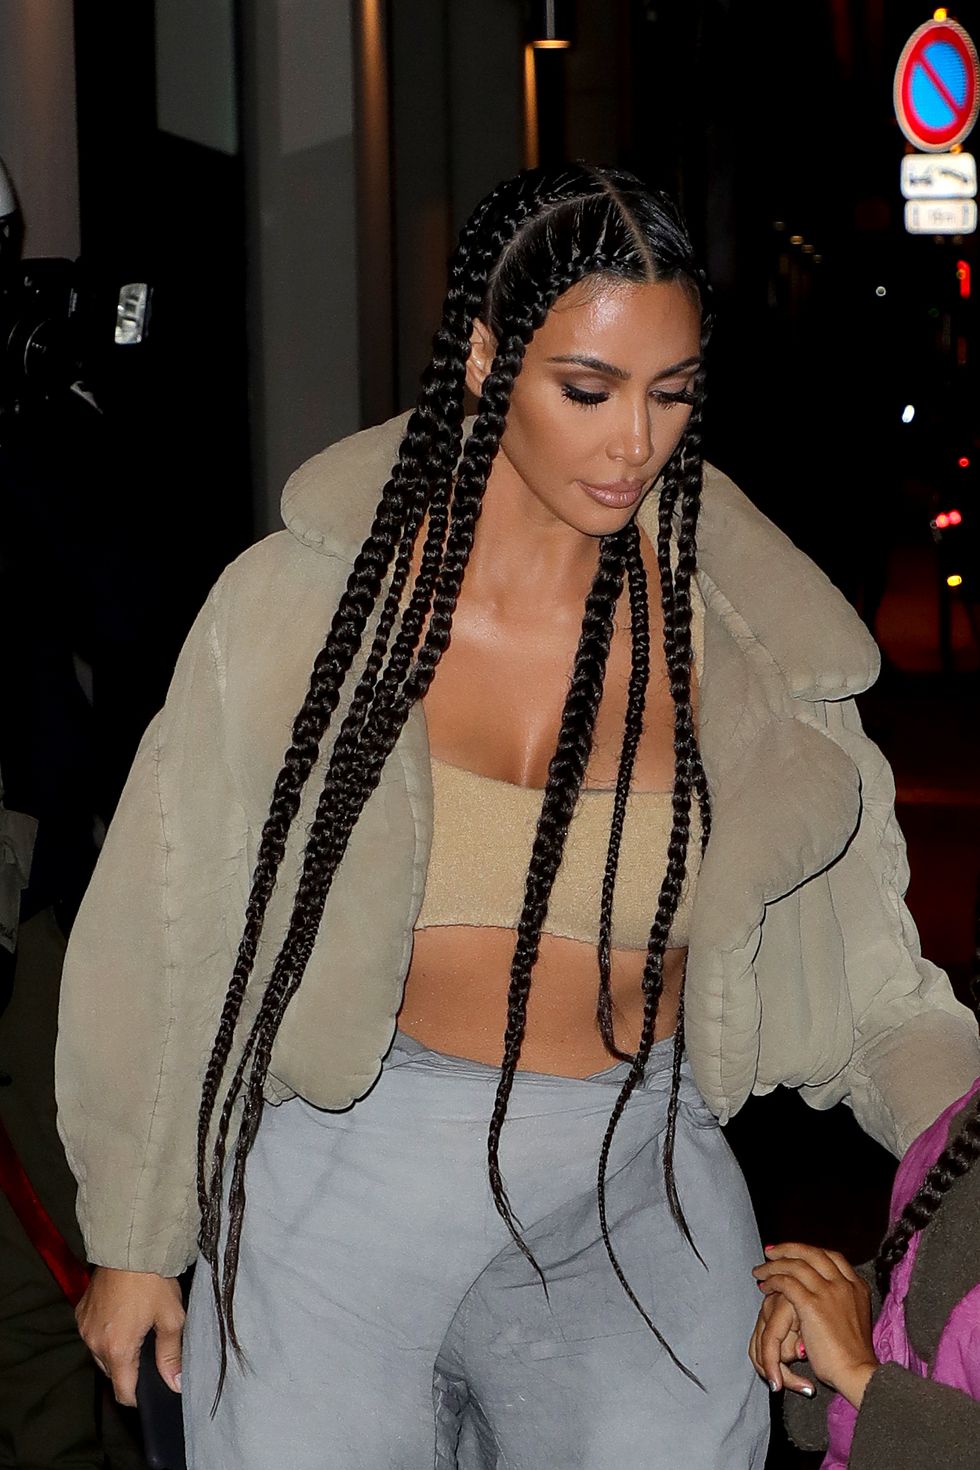 paris, france   march 02 kim kardashian west is seen arriving at a restaurant on march 02, 2020 in paris, france photo by pierre suugc images